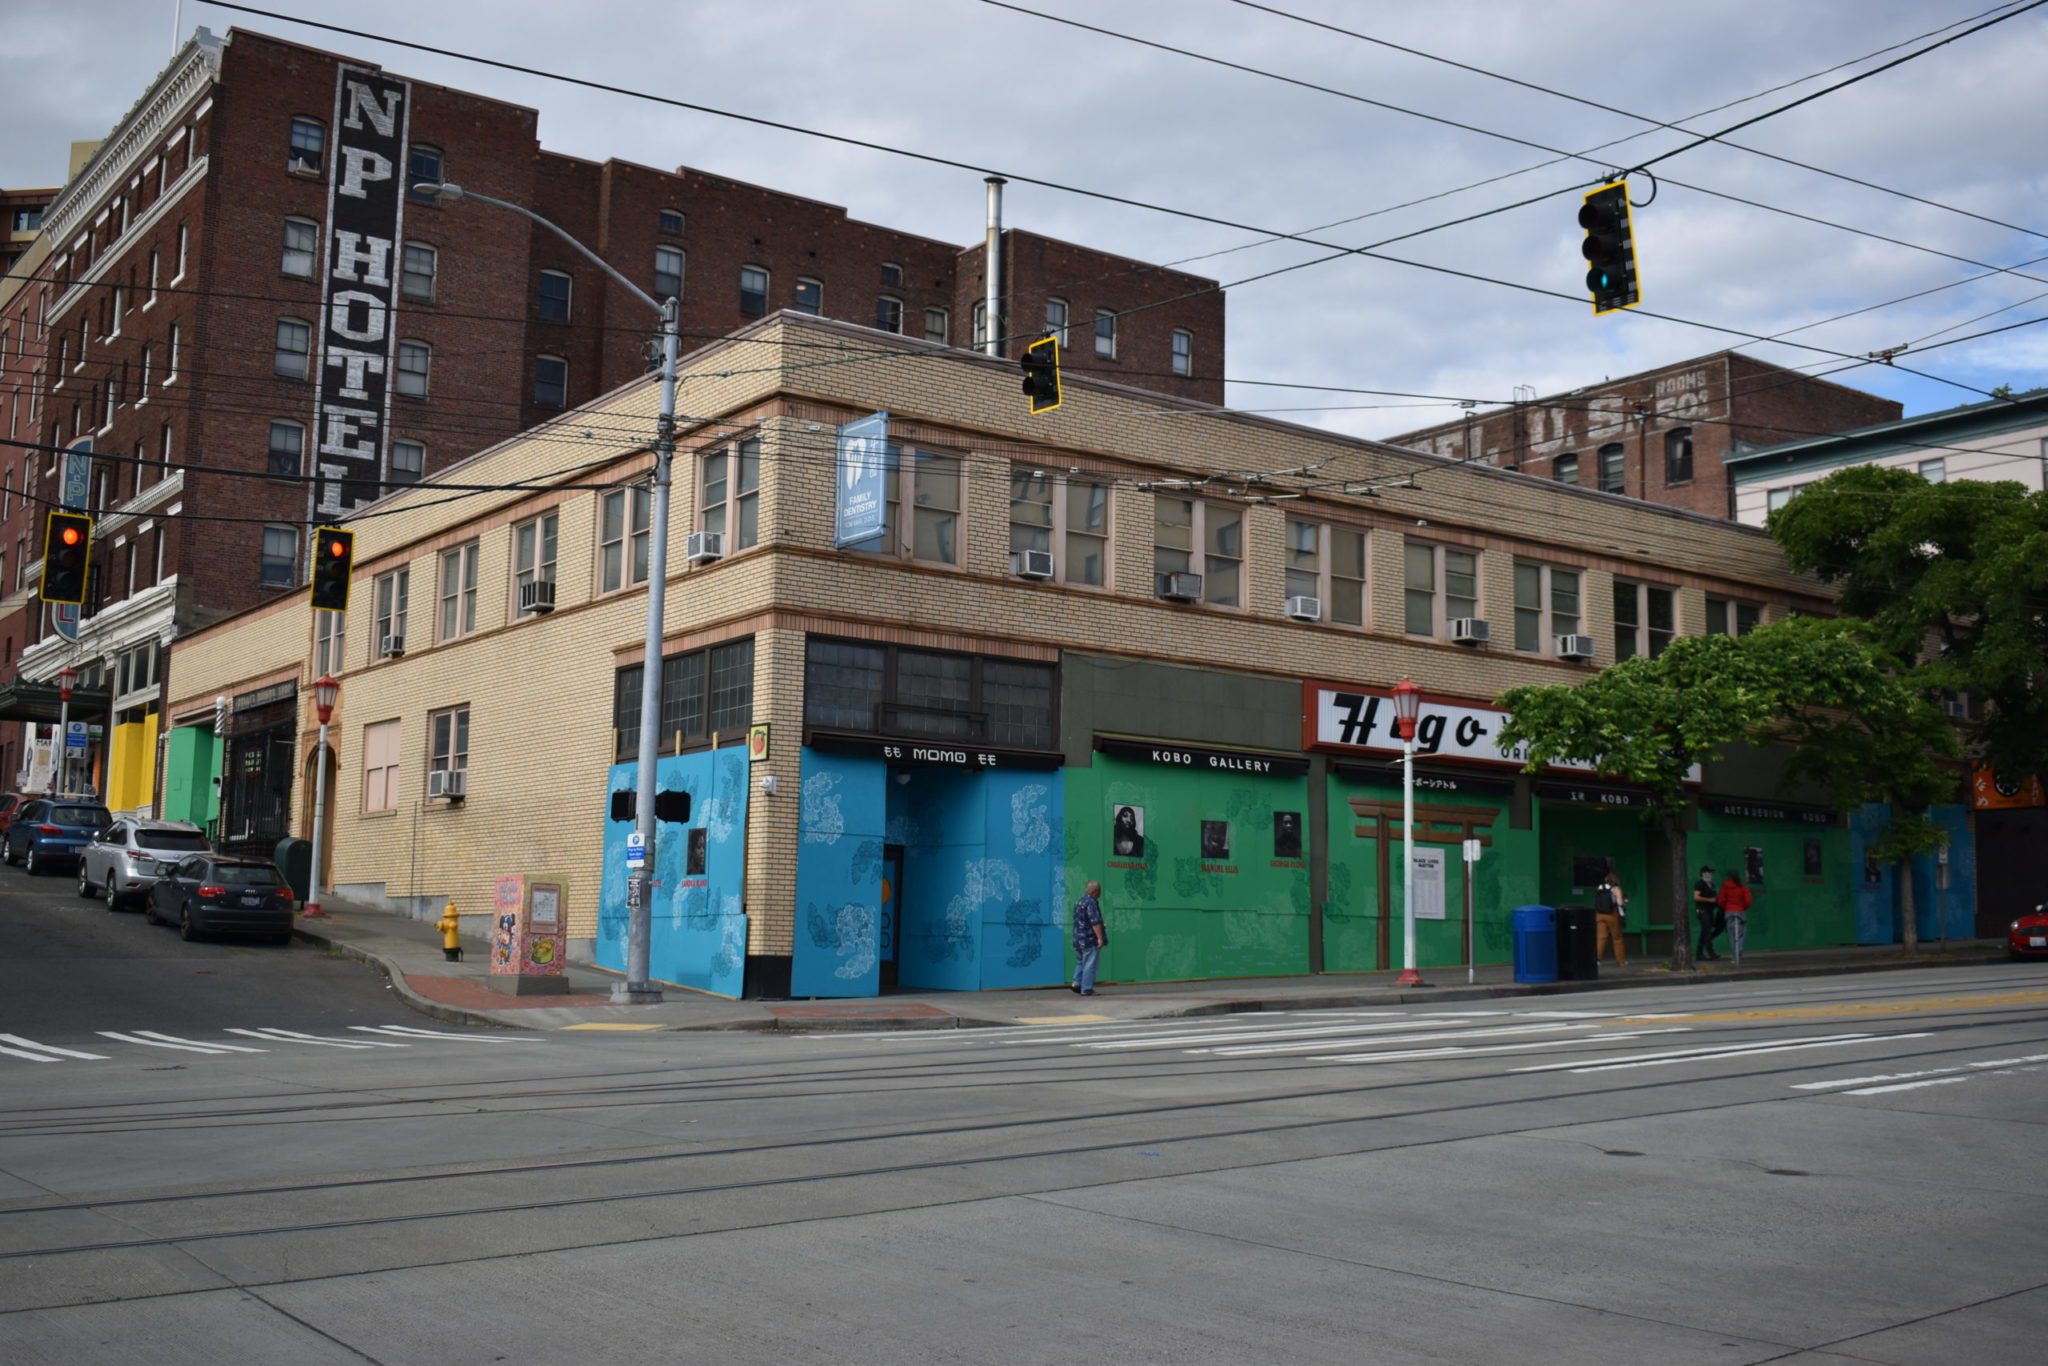 Photo of Jackson Building located in Chinatown-International District on 6th and Jackson.